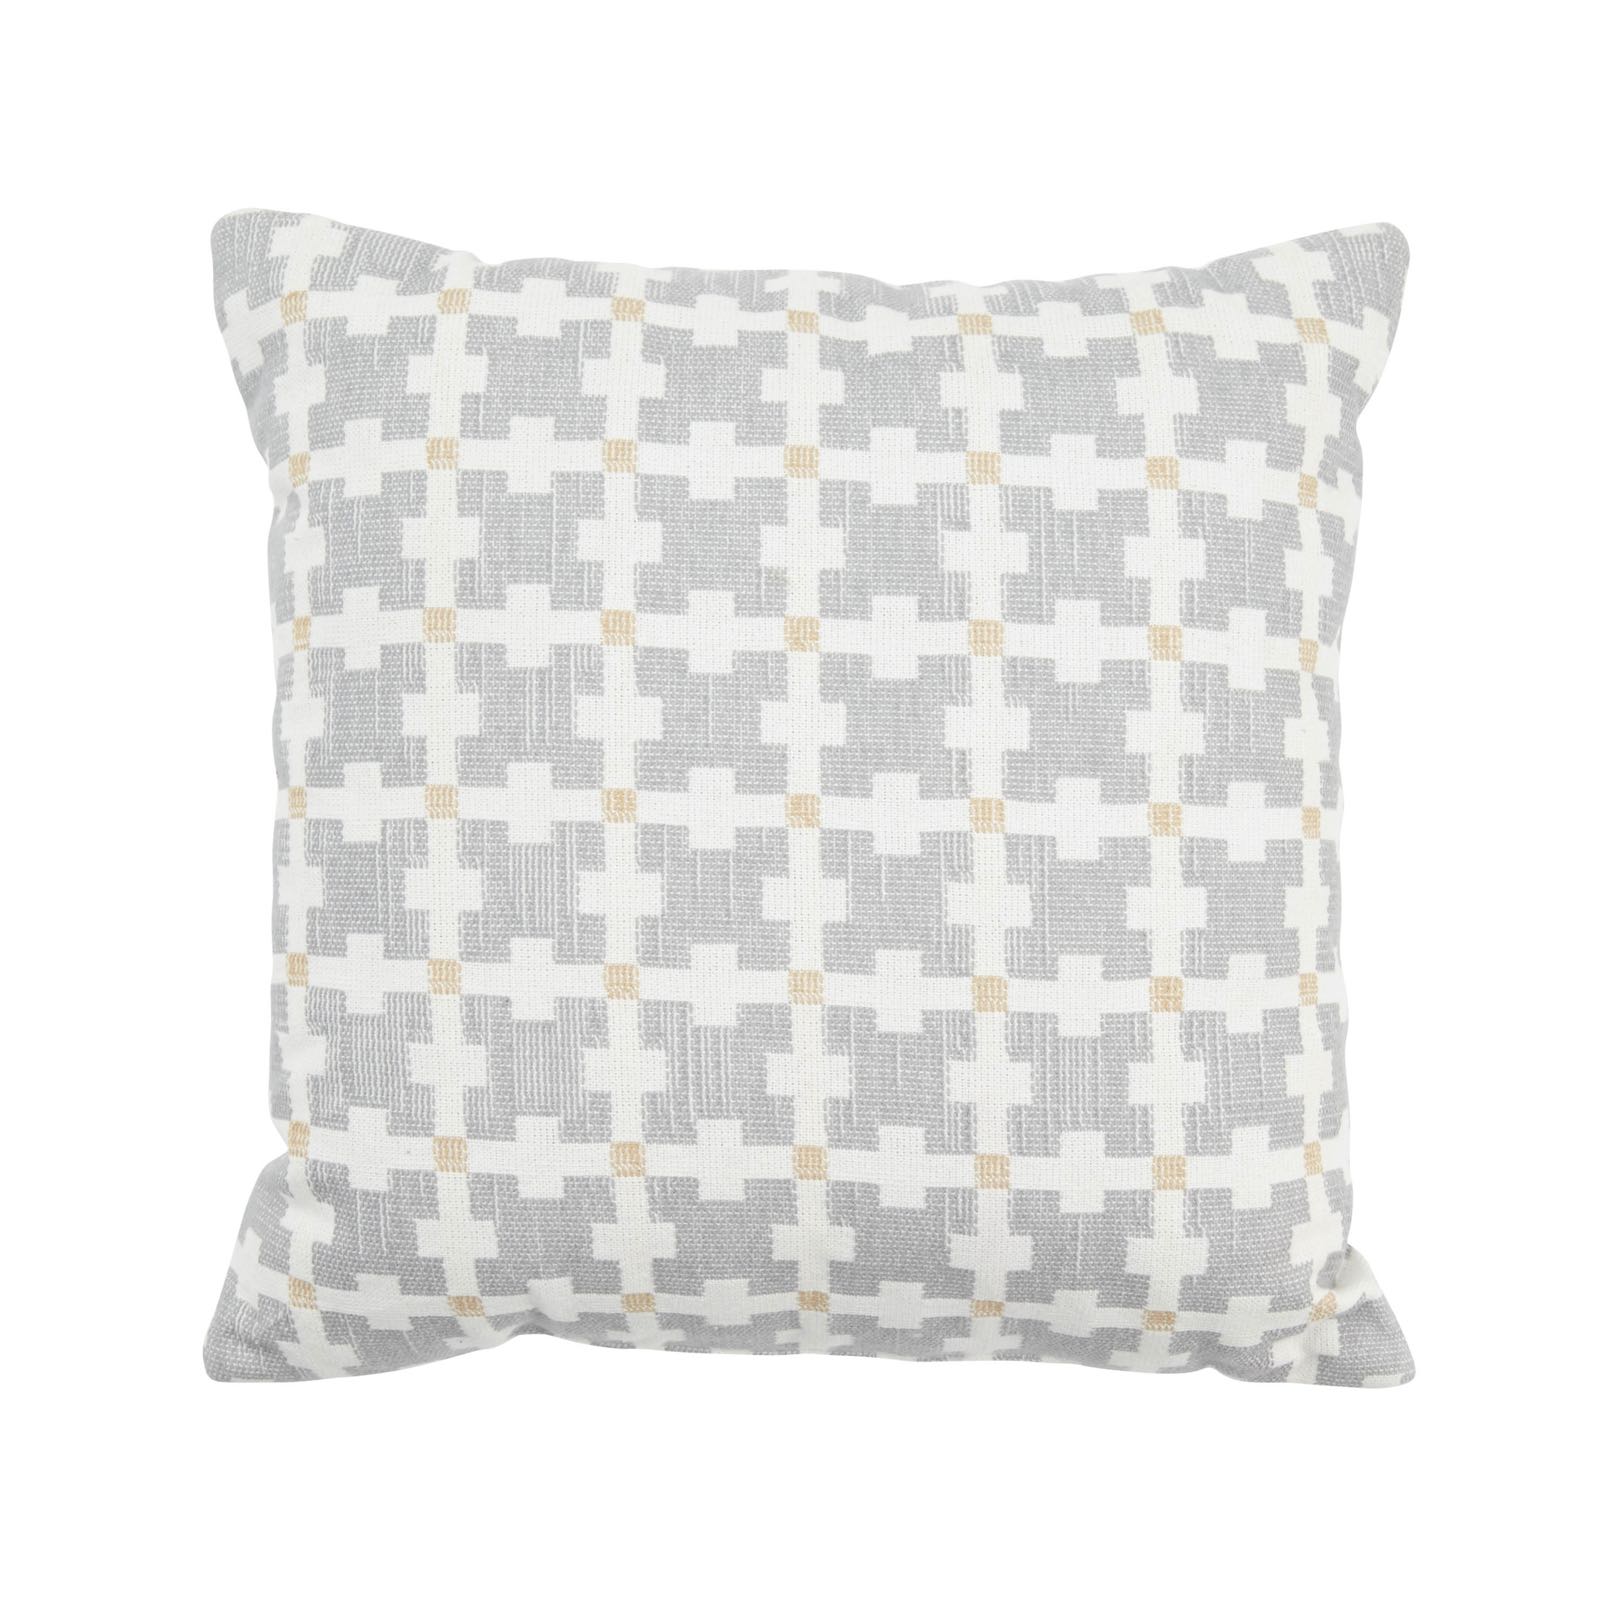 New at Target! Project 62 home decor collection lookbook pictures